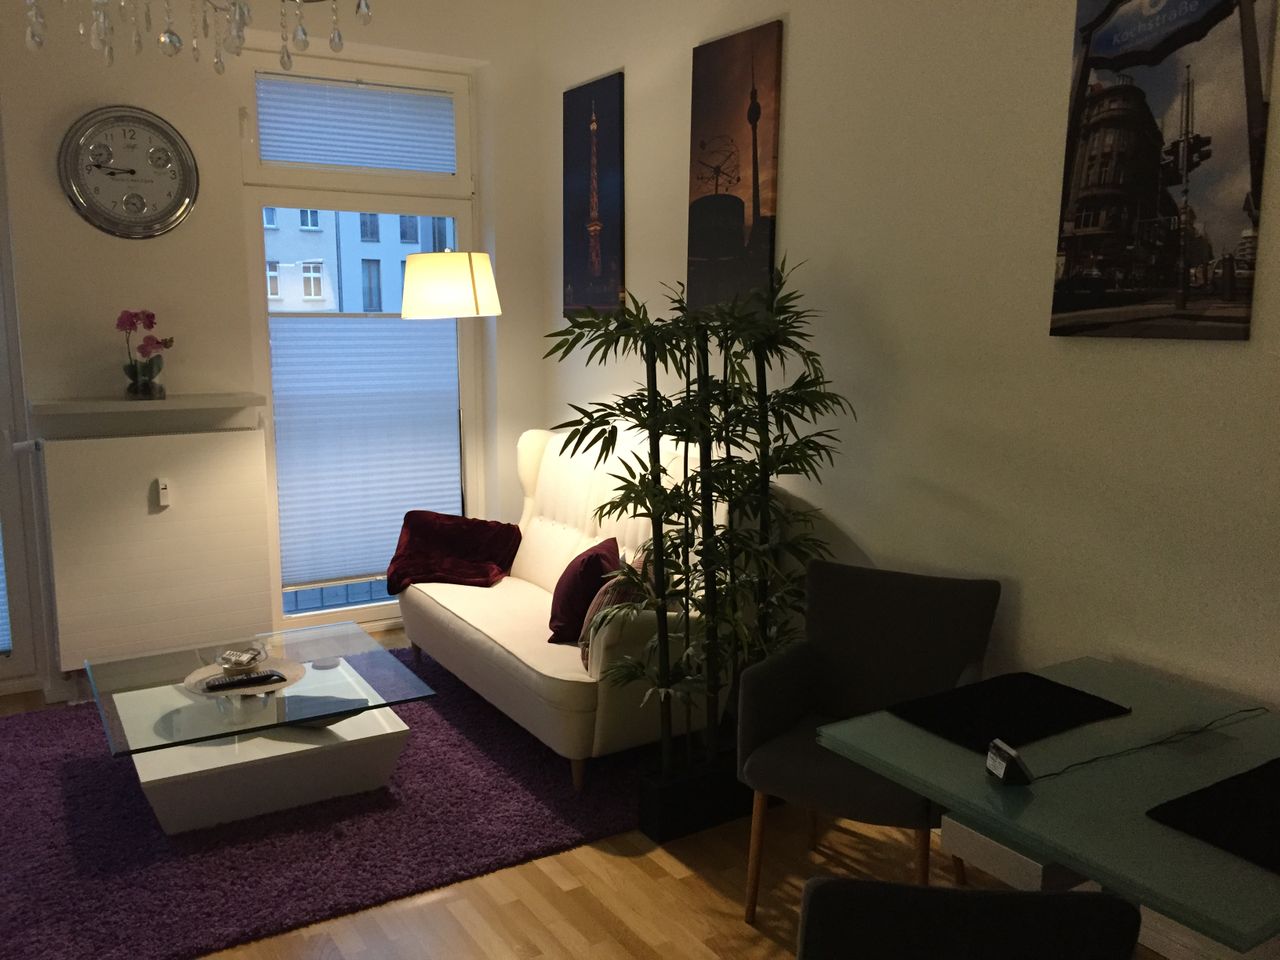 Wonderful and fashionable home in Prenzlauer Berg